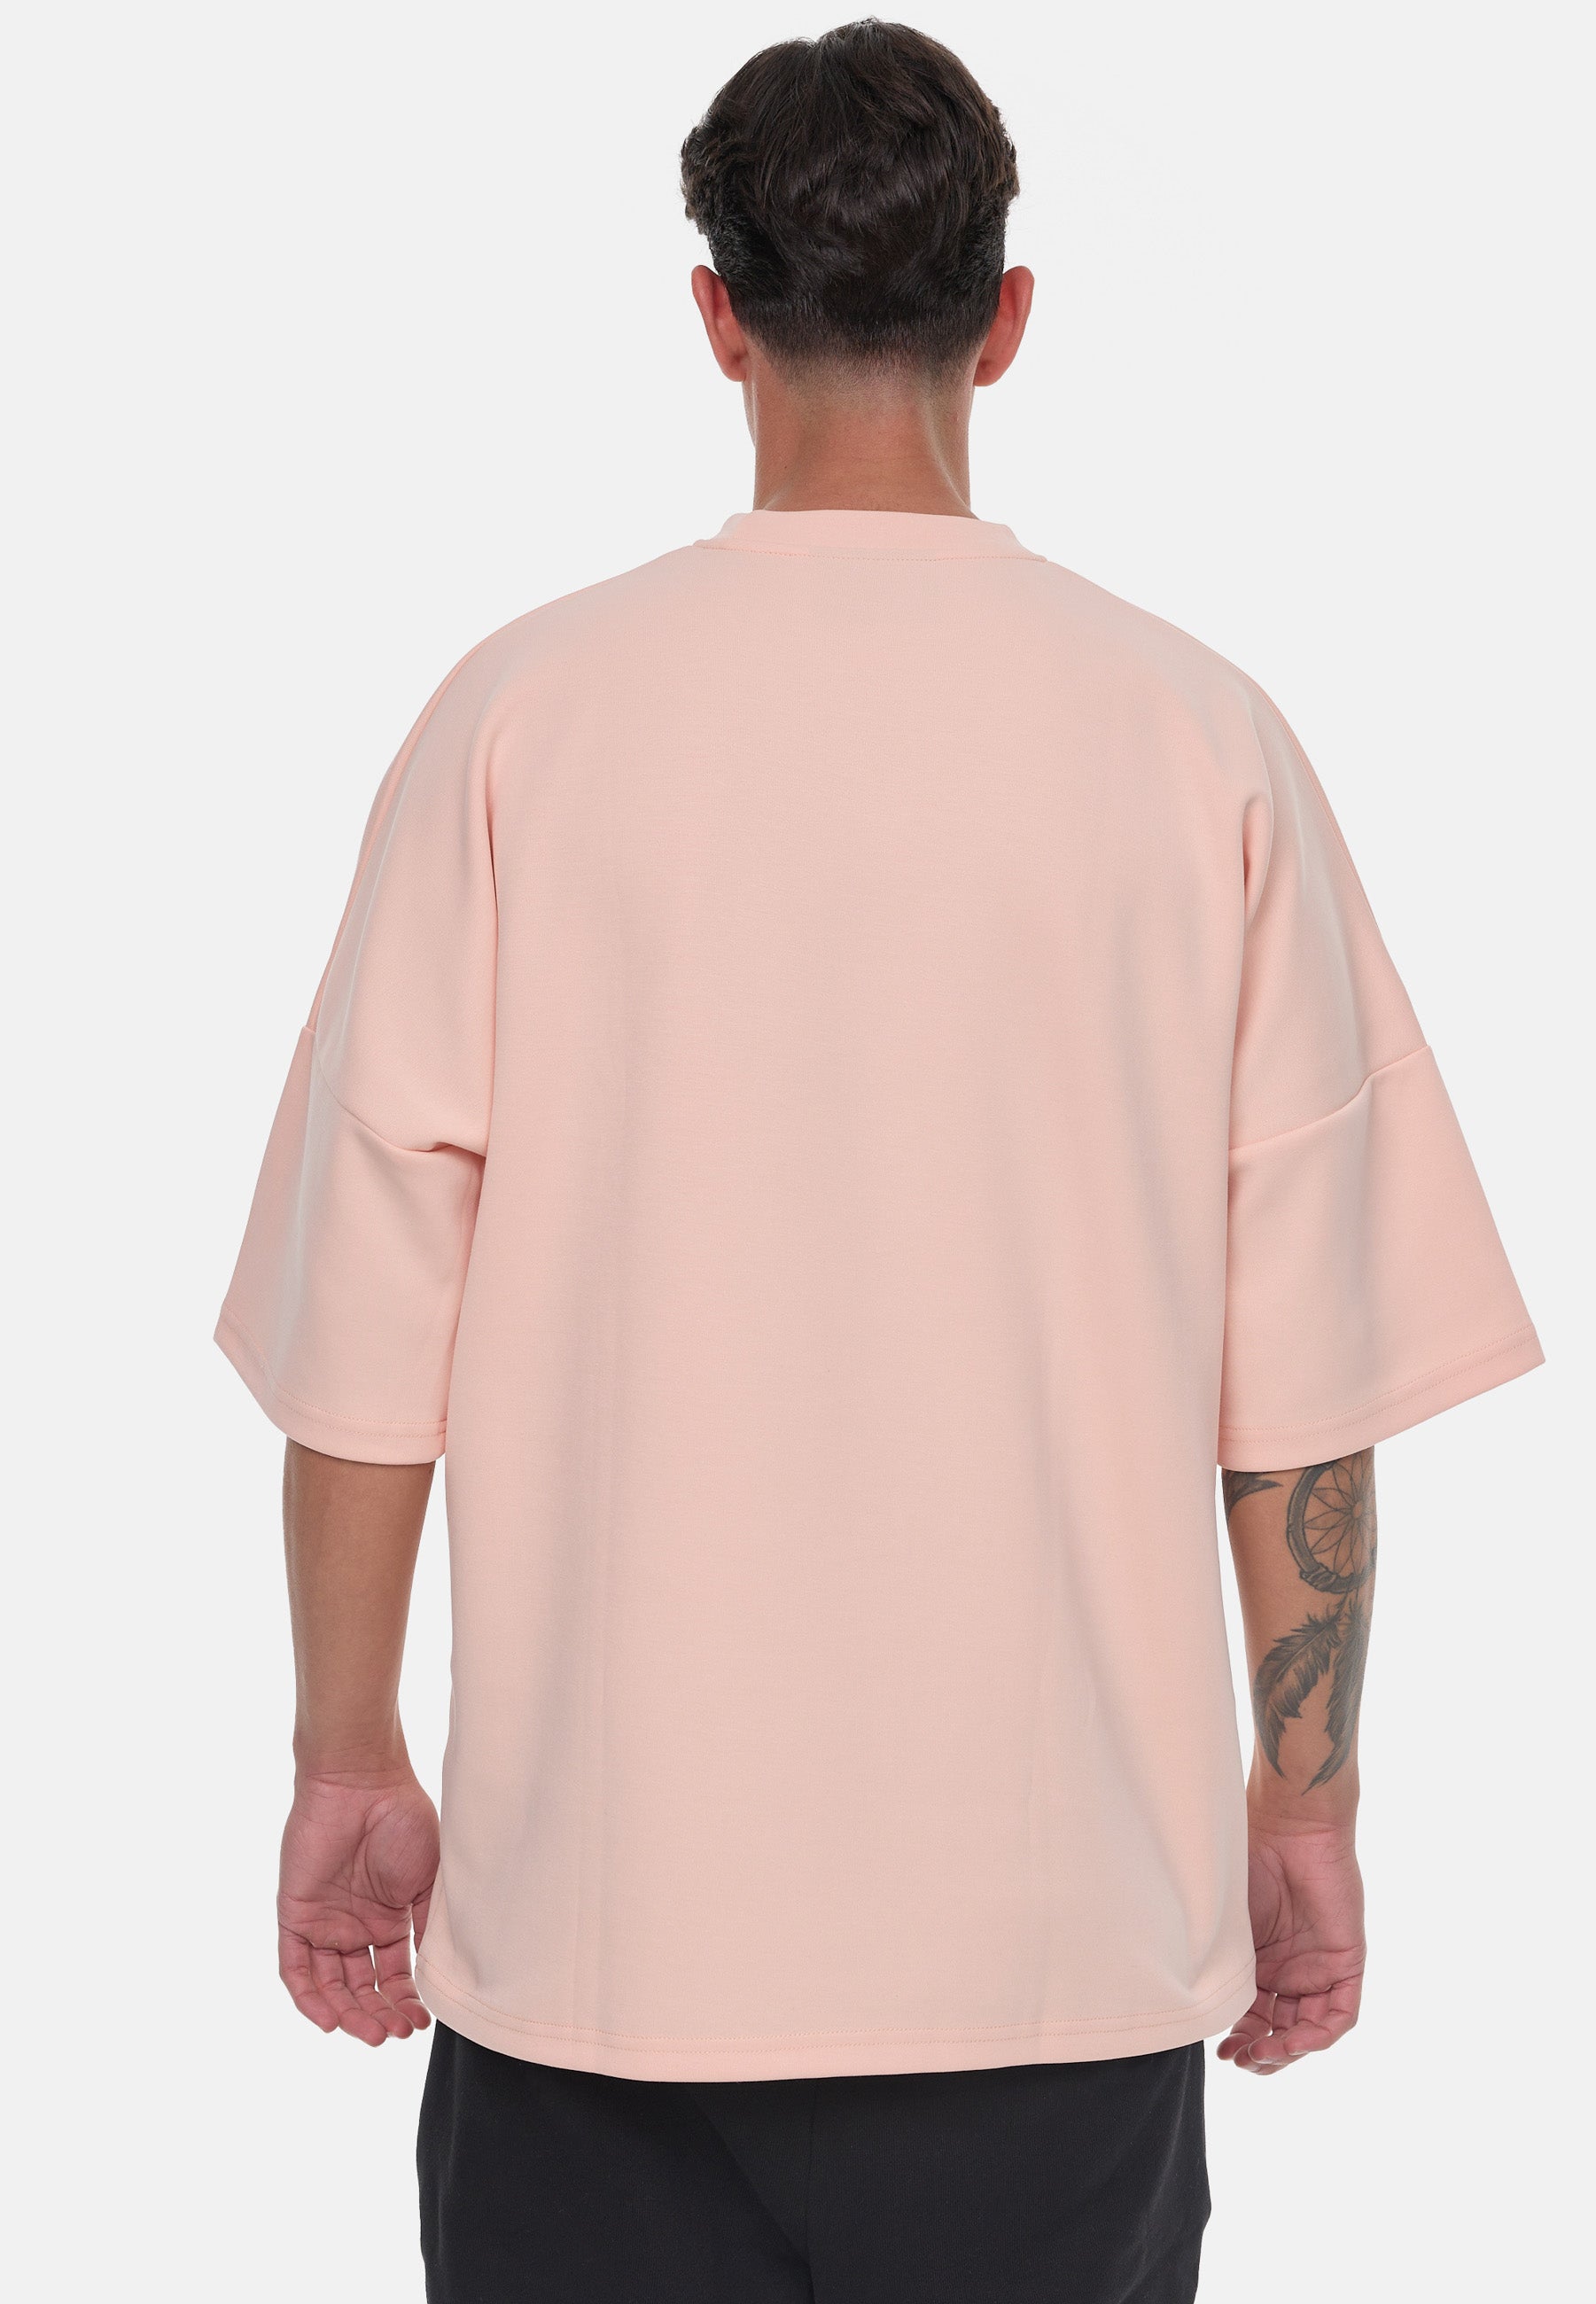 LUXAGER T-Shirt Oversize salmon pink – Luxager